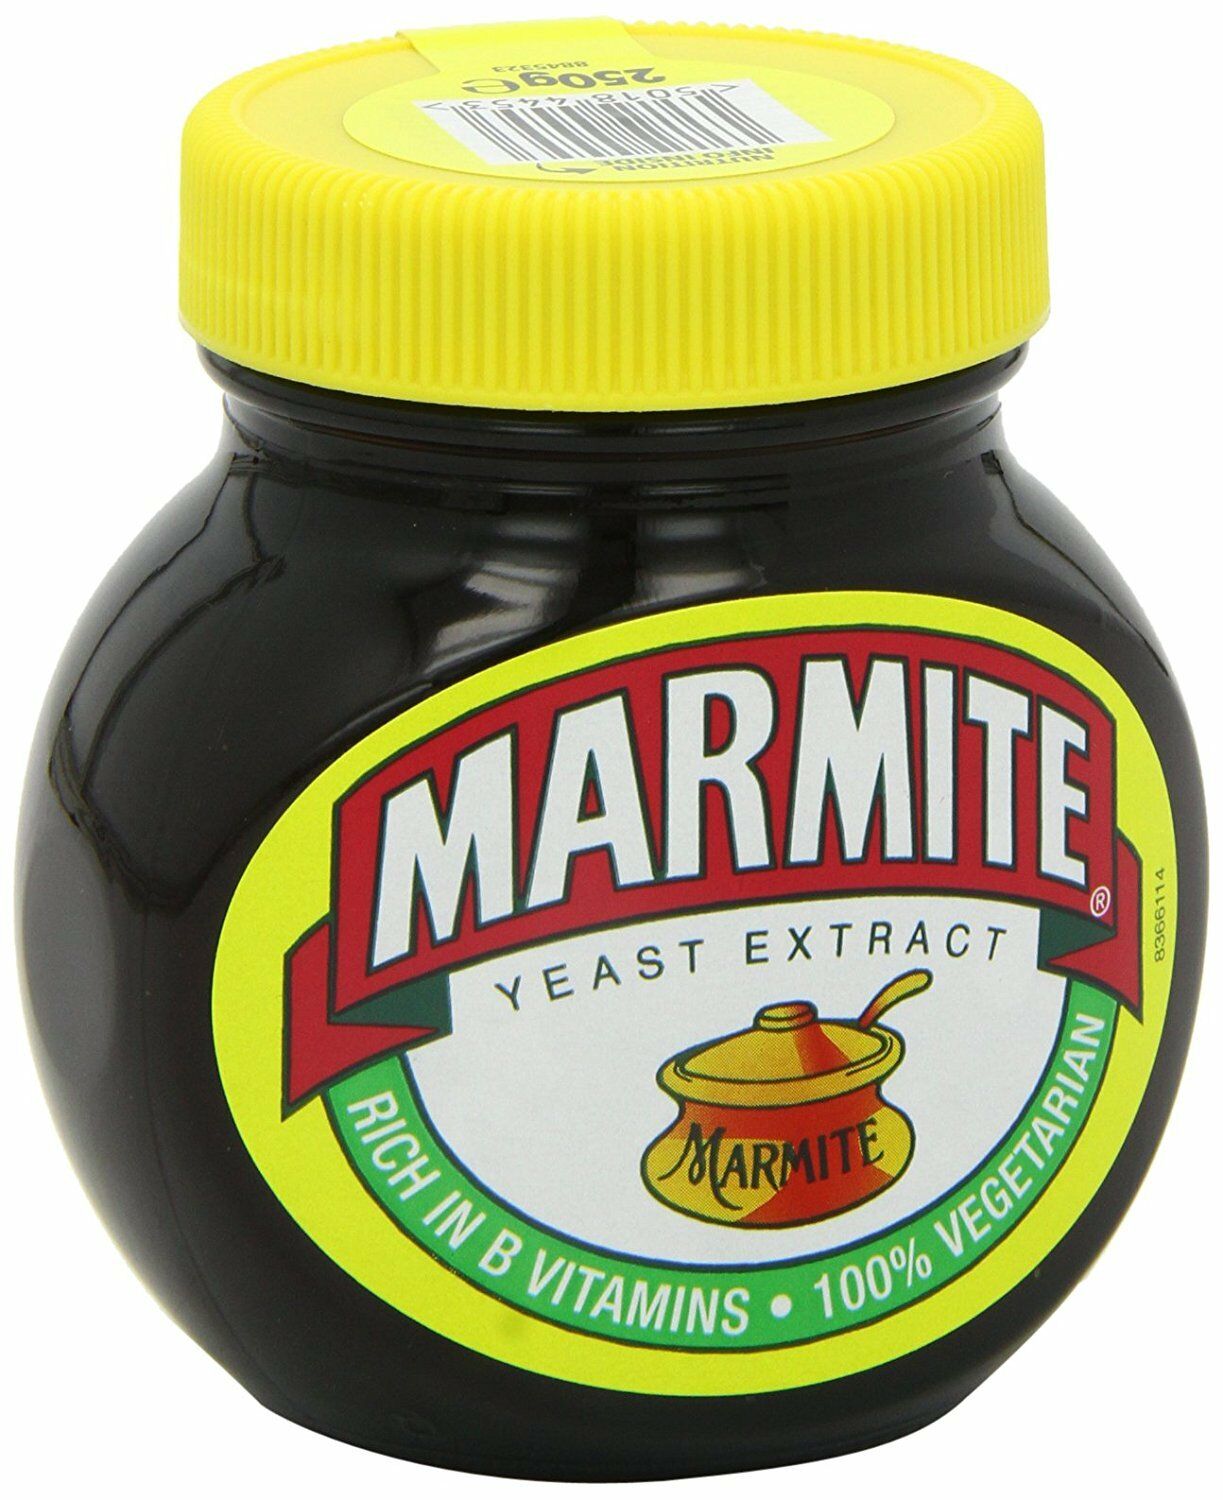 Marmite Yeast Extract Spreads Jar (Imported) 250g.